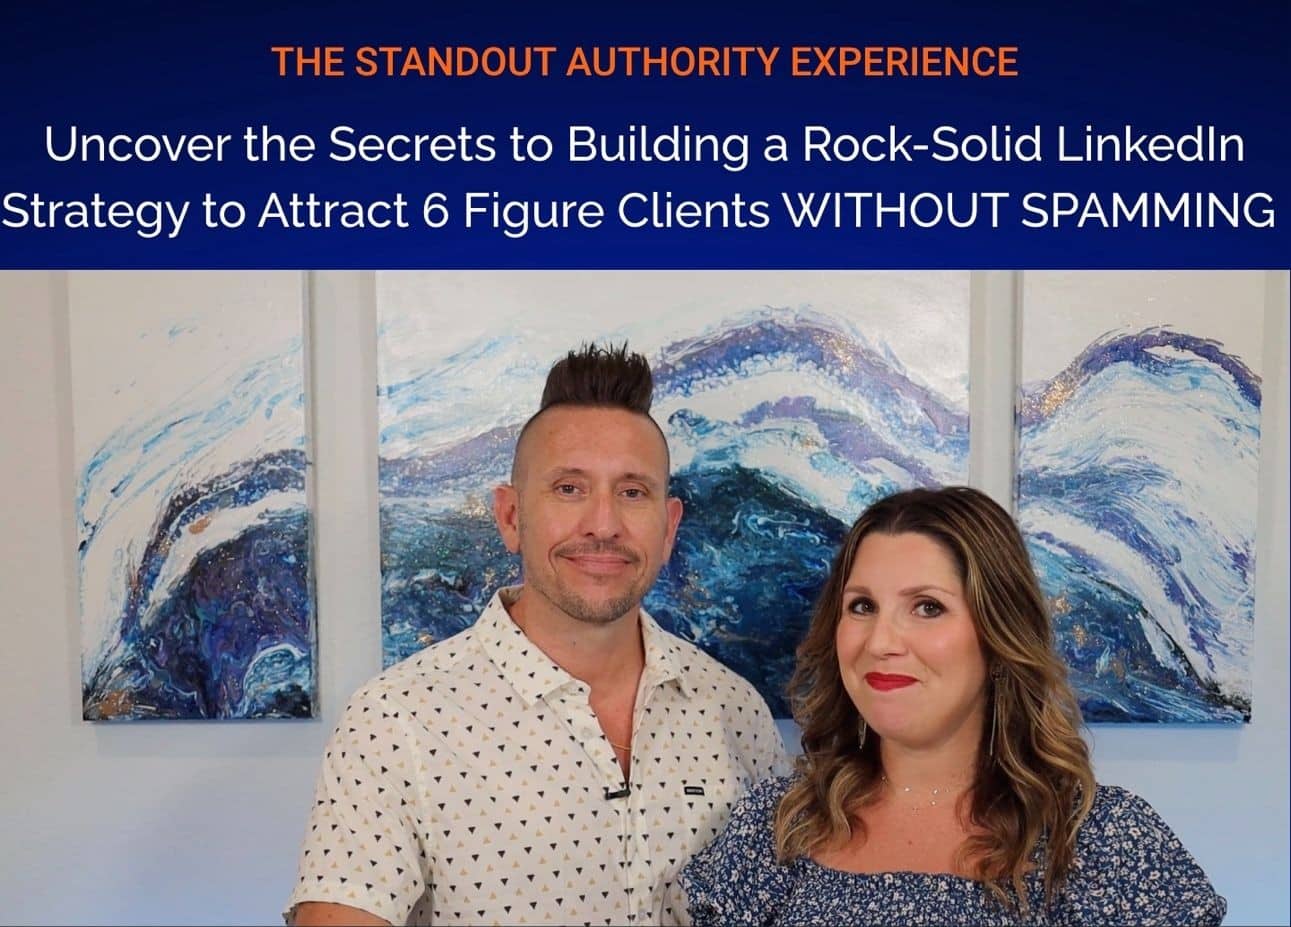 The Standout Authority Experience